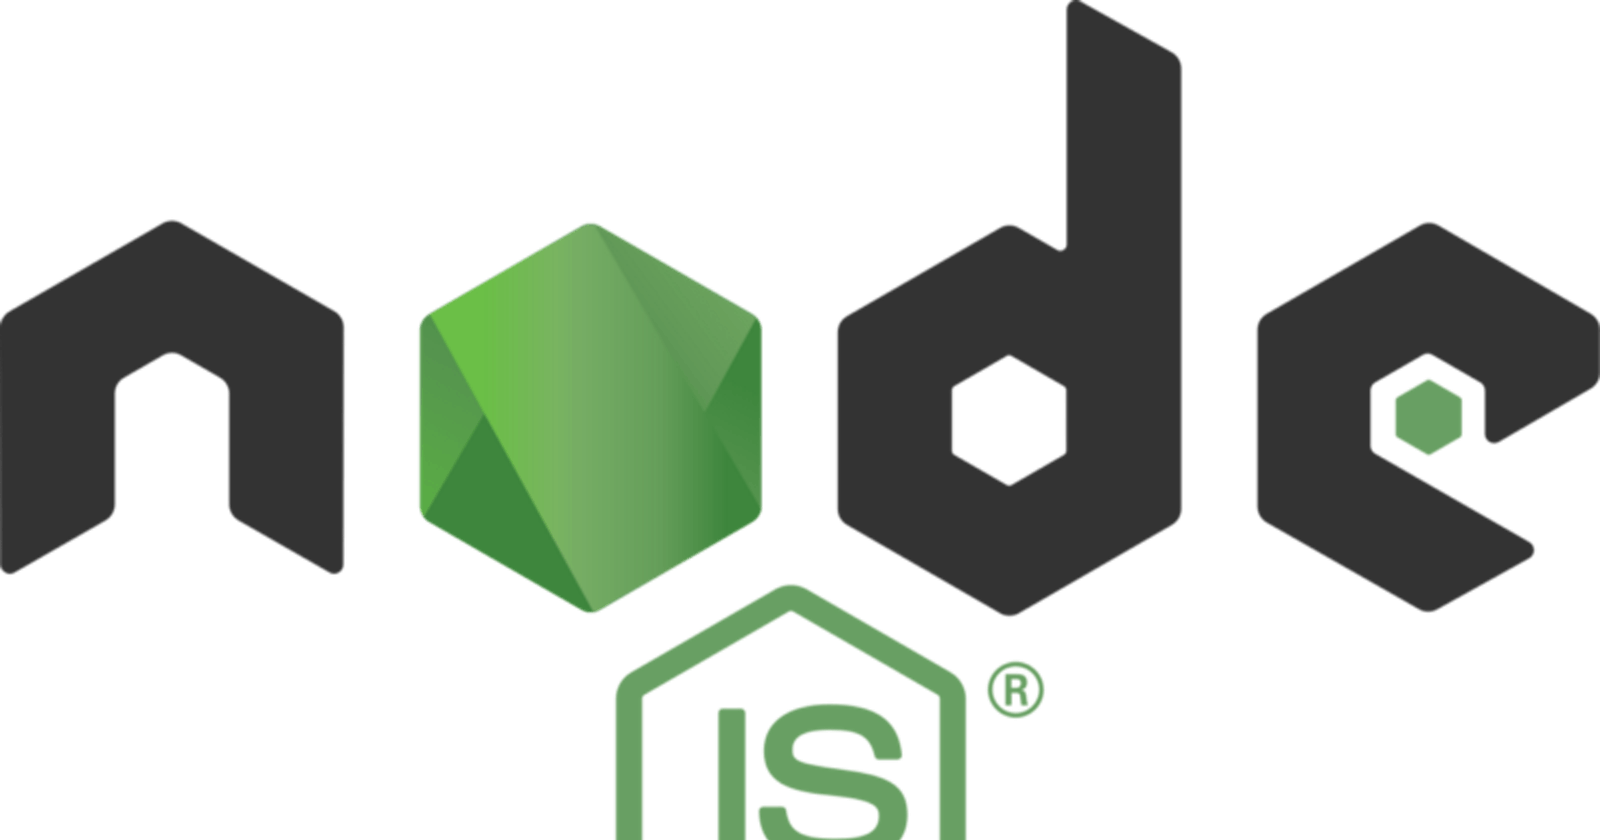 What the heck is Node.js?